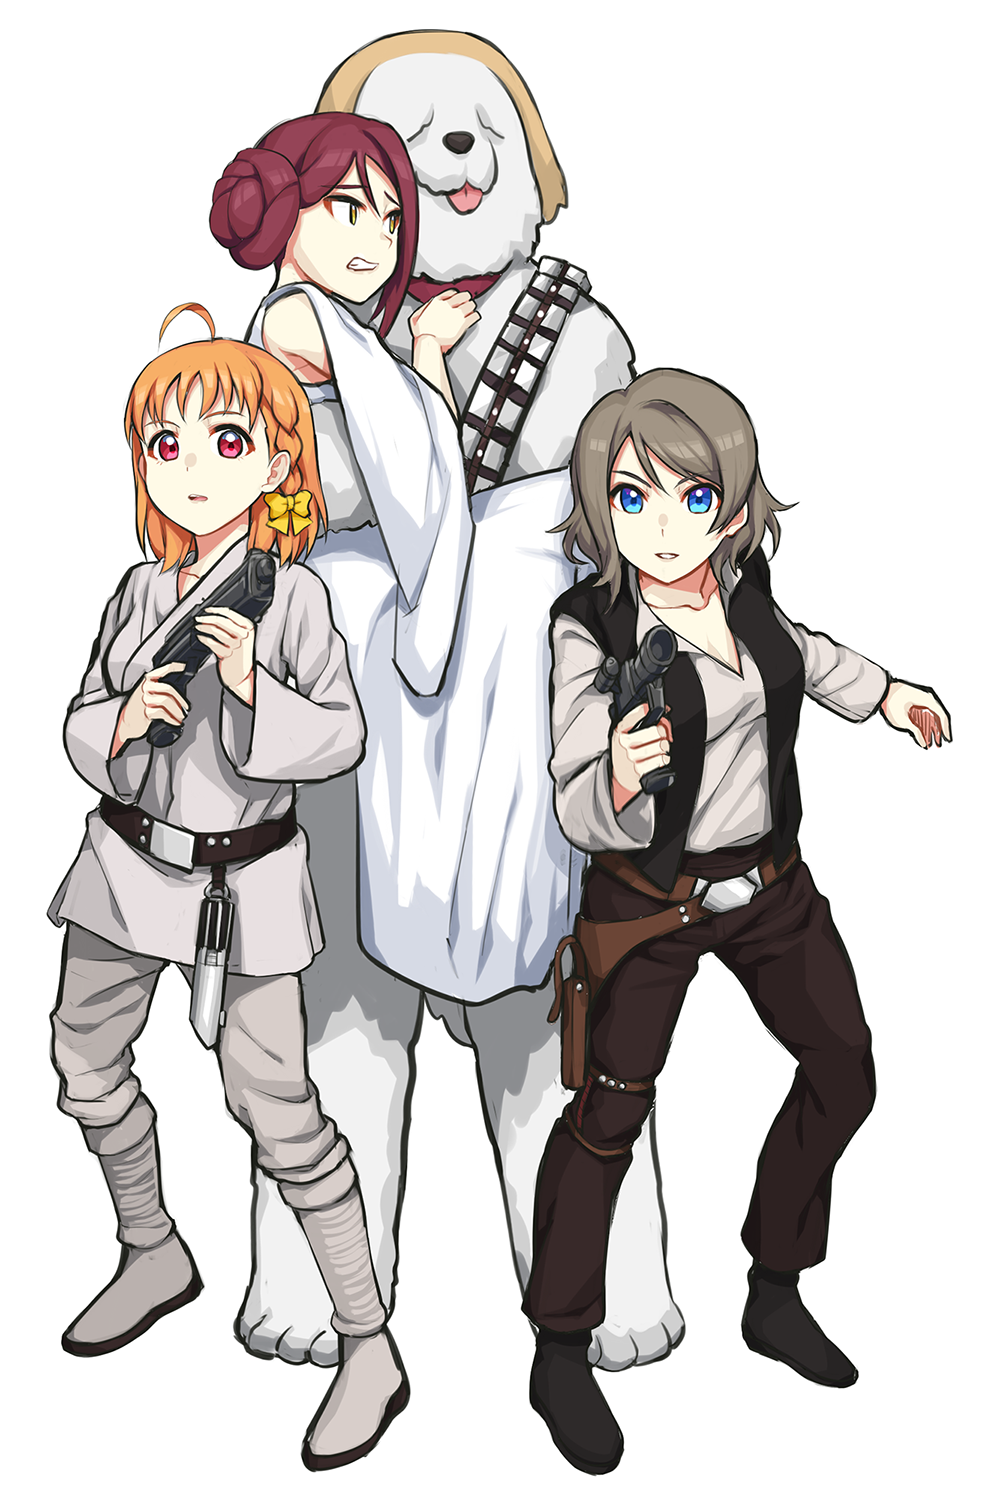 ahoge blue_eyes bow brown_hair chewbacca chewbacca_(cosplay) chu_kai_man collarbone commentary_request cosplay dog energy_sword eyebrows_visible_through_hair full_body gun hair_bow hair_bun han_solo han_solo_(cosplay) highres holding holding_gun holding_weapon lightsaber looking_at_another looking_at_viewer love_live! love_live!_sunshine!! luke_skywalker luke_skywalker_(cosplay) multiple_girls namesake orange_hair parted_lips pink_eyes princess_leia_organa_solo princess_leia_organa_solo_(cosplay) pun red_hair sakurauchi_riko shiitake_(love_live!_sunshine!!) short_hair star_wars sword takami_chika transparent_background watanabe_you weapon yellow_bow yellow_eyes